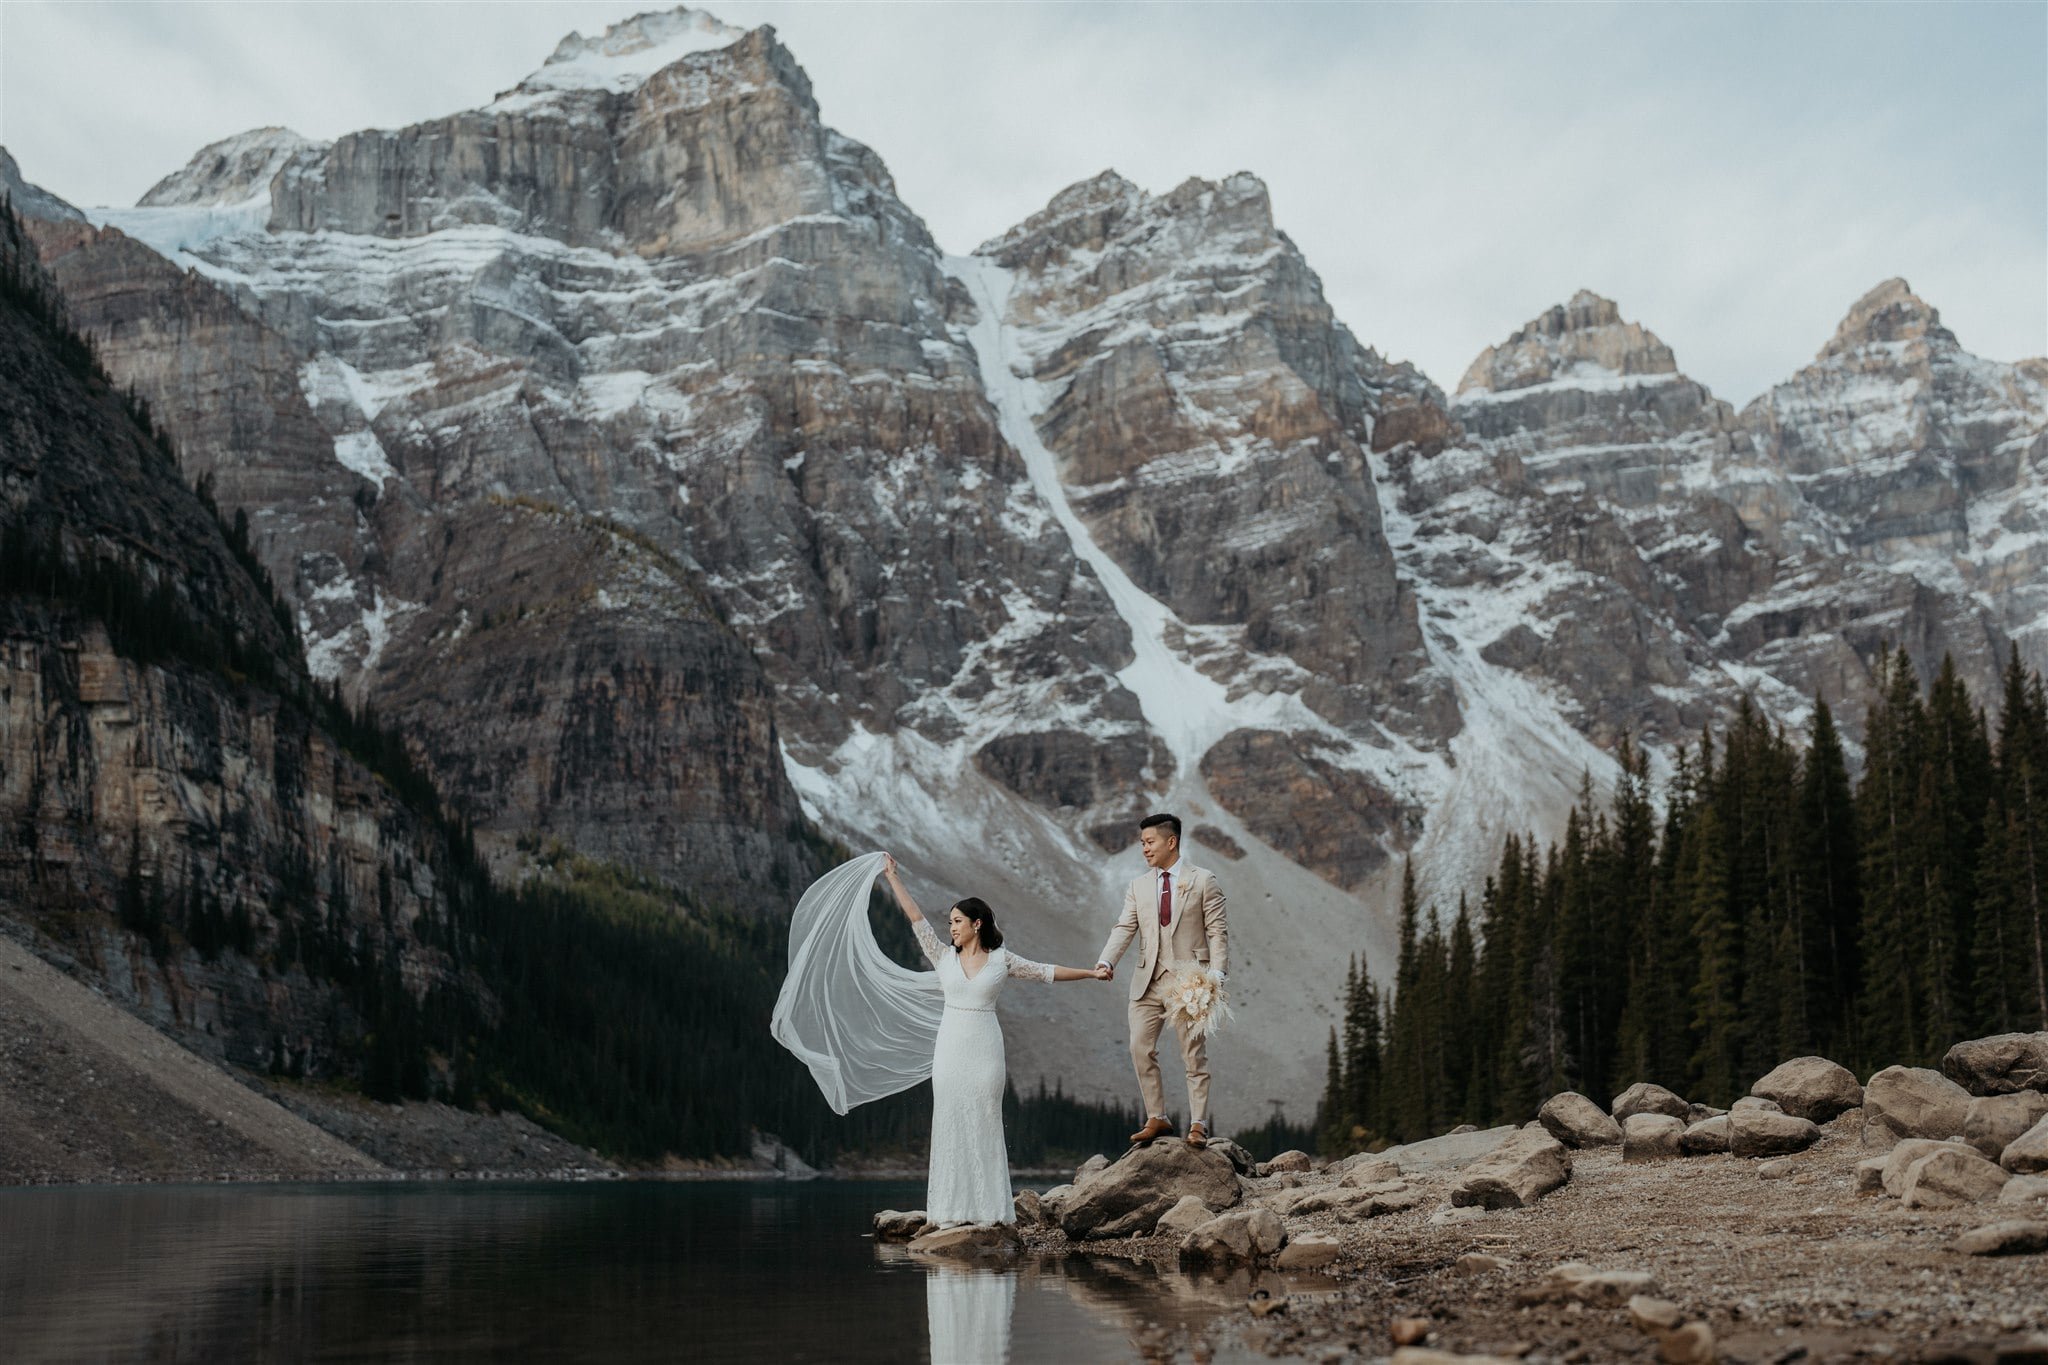 Elopement photos at sunrise in Banff National Park